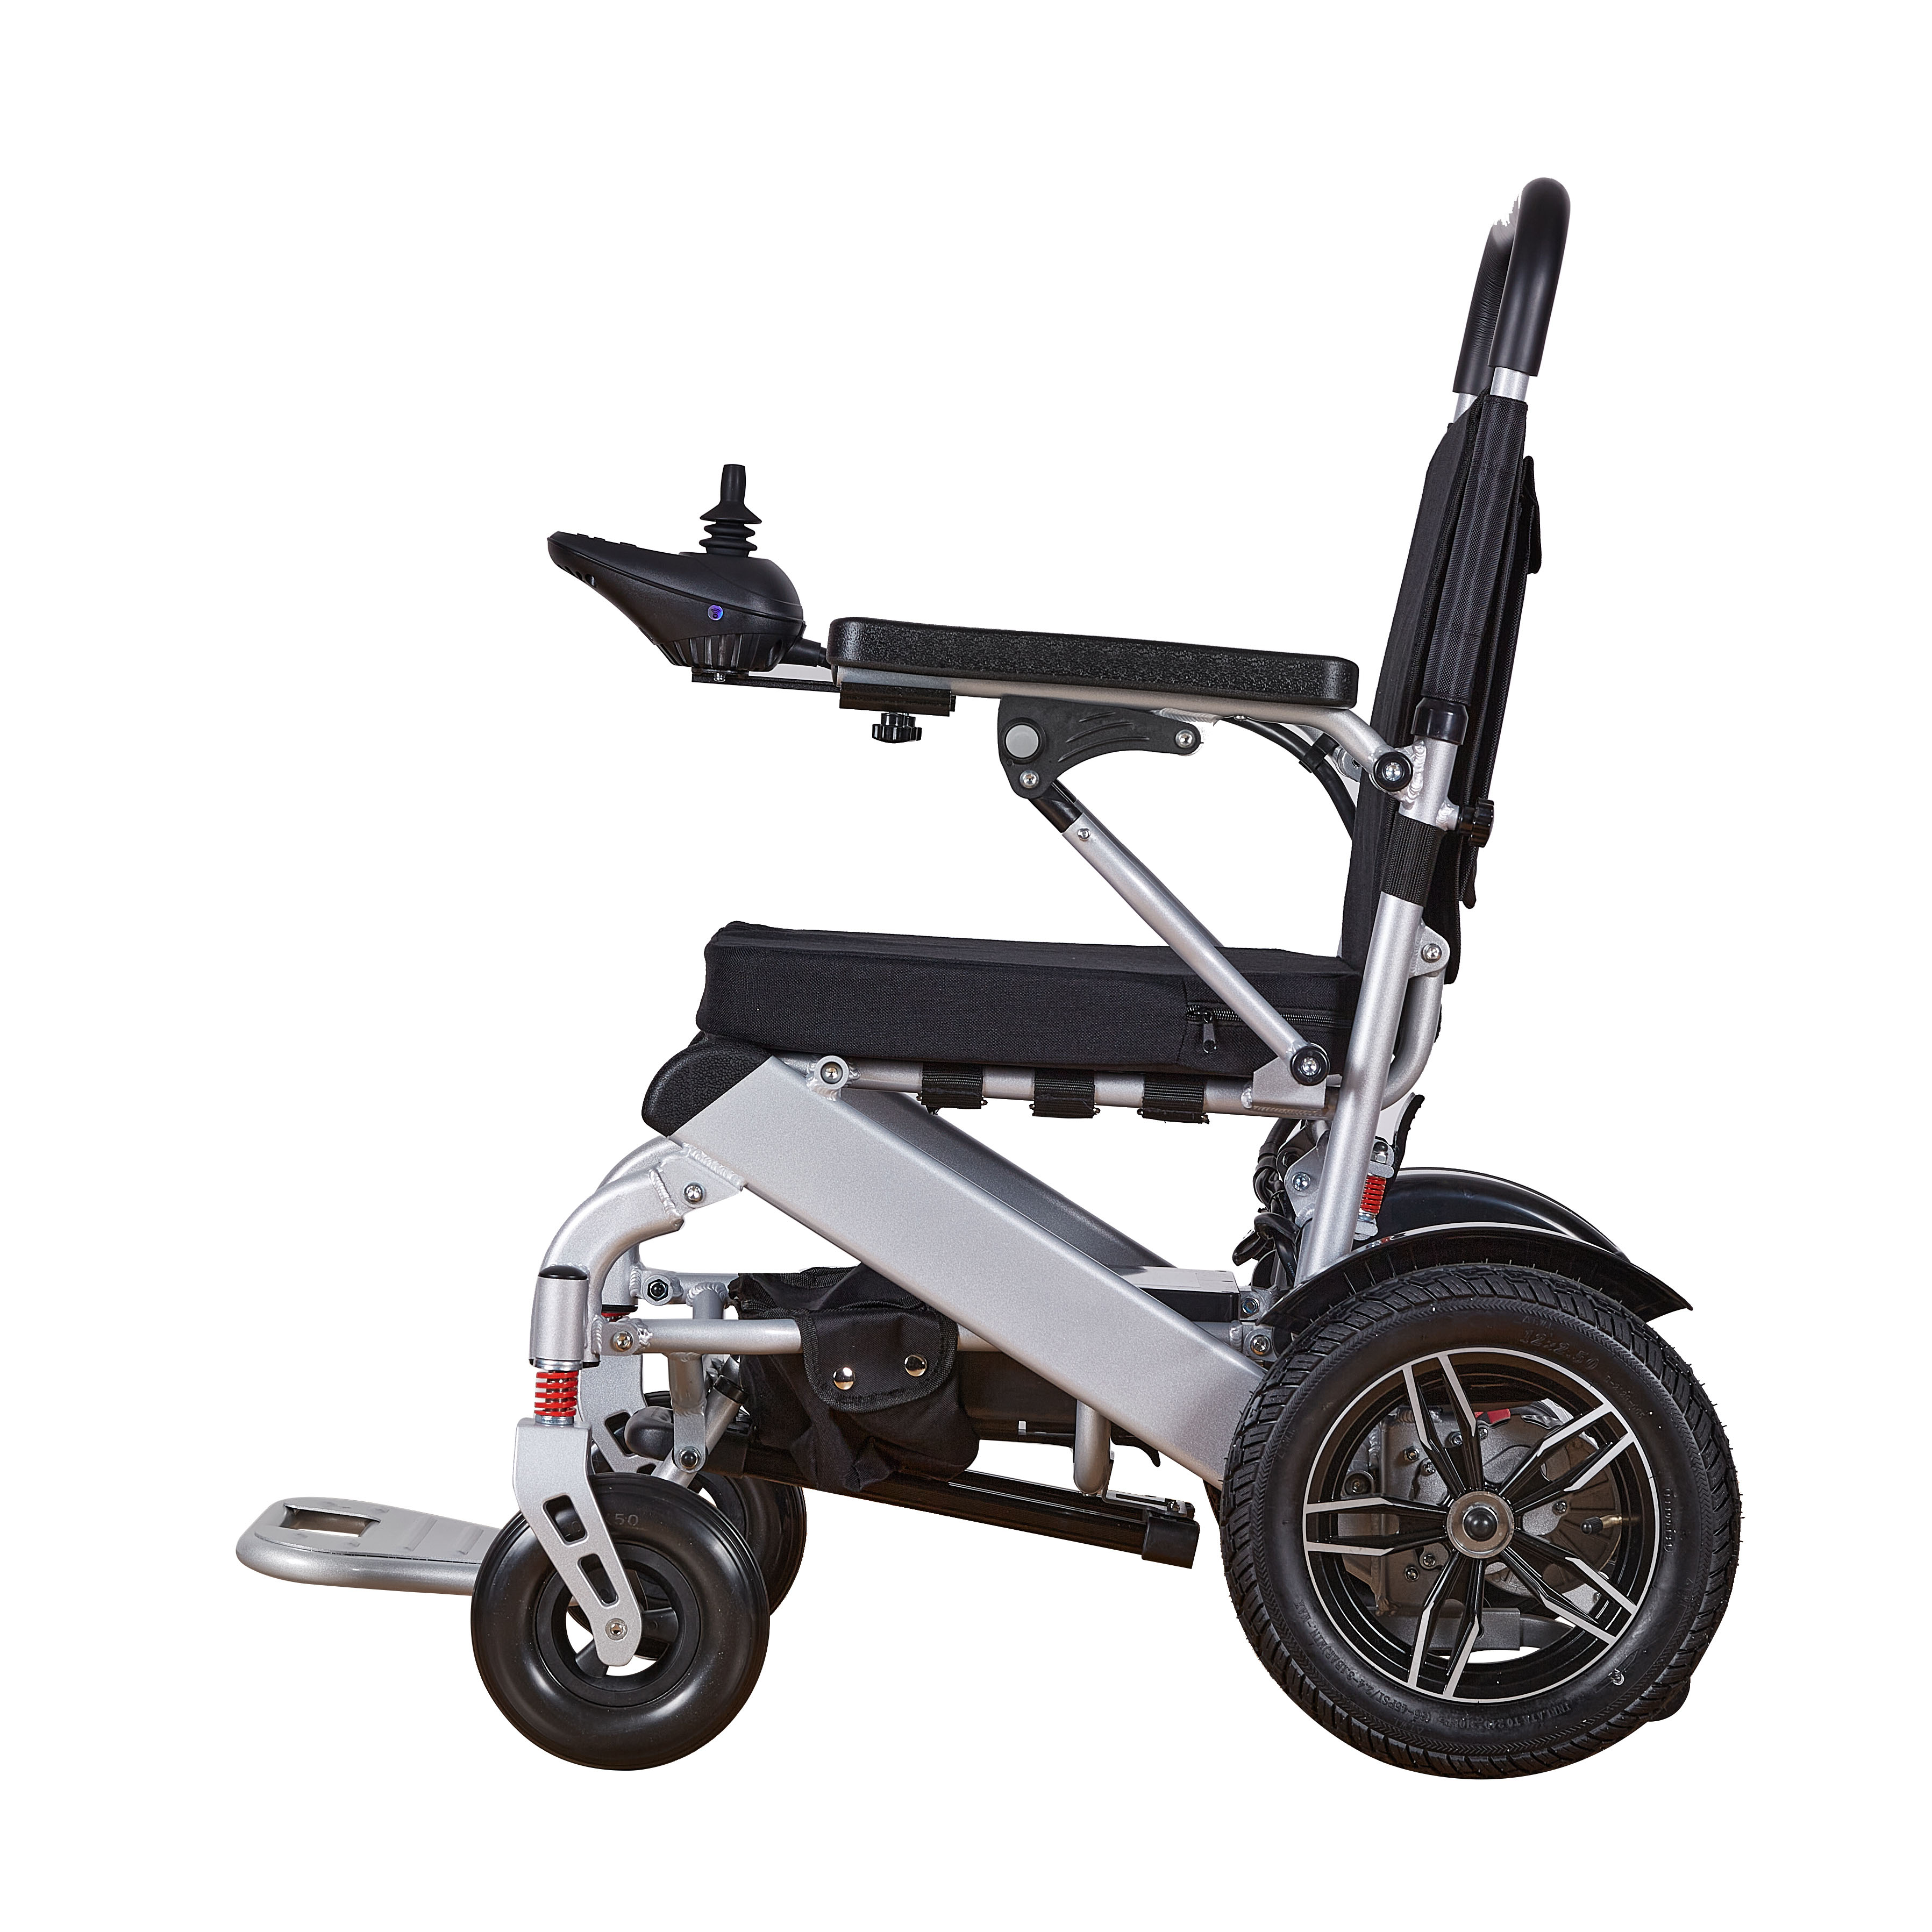 Is the weighing capacity of carbon fiber folding wheelchair important？